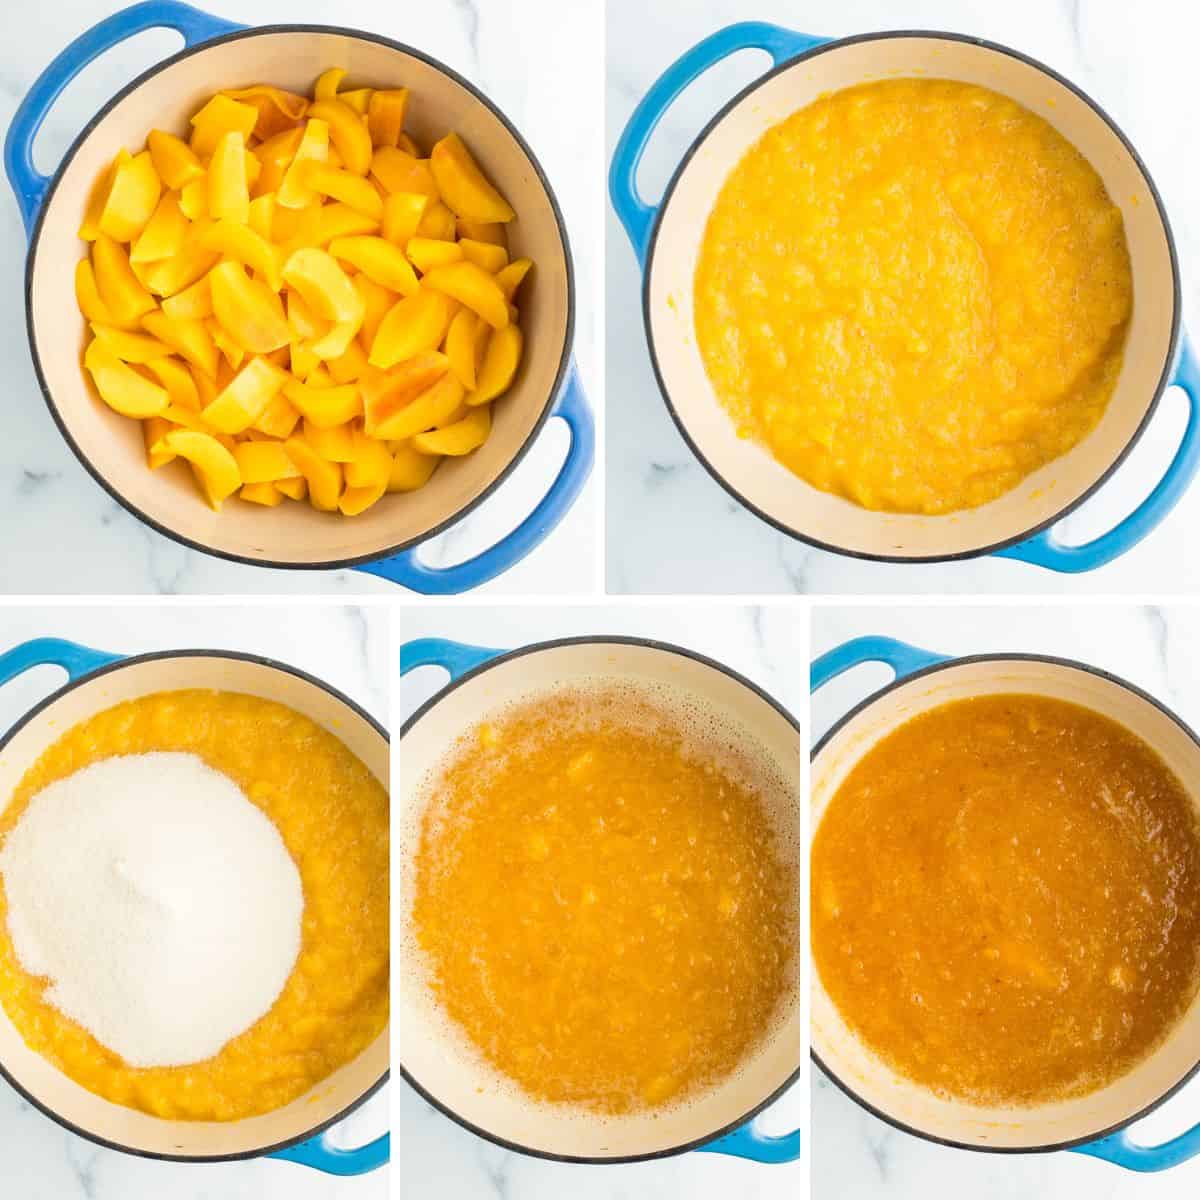 5 photos showing the process of reducing peaches in a cast iron dutch oven.